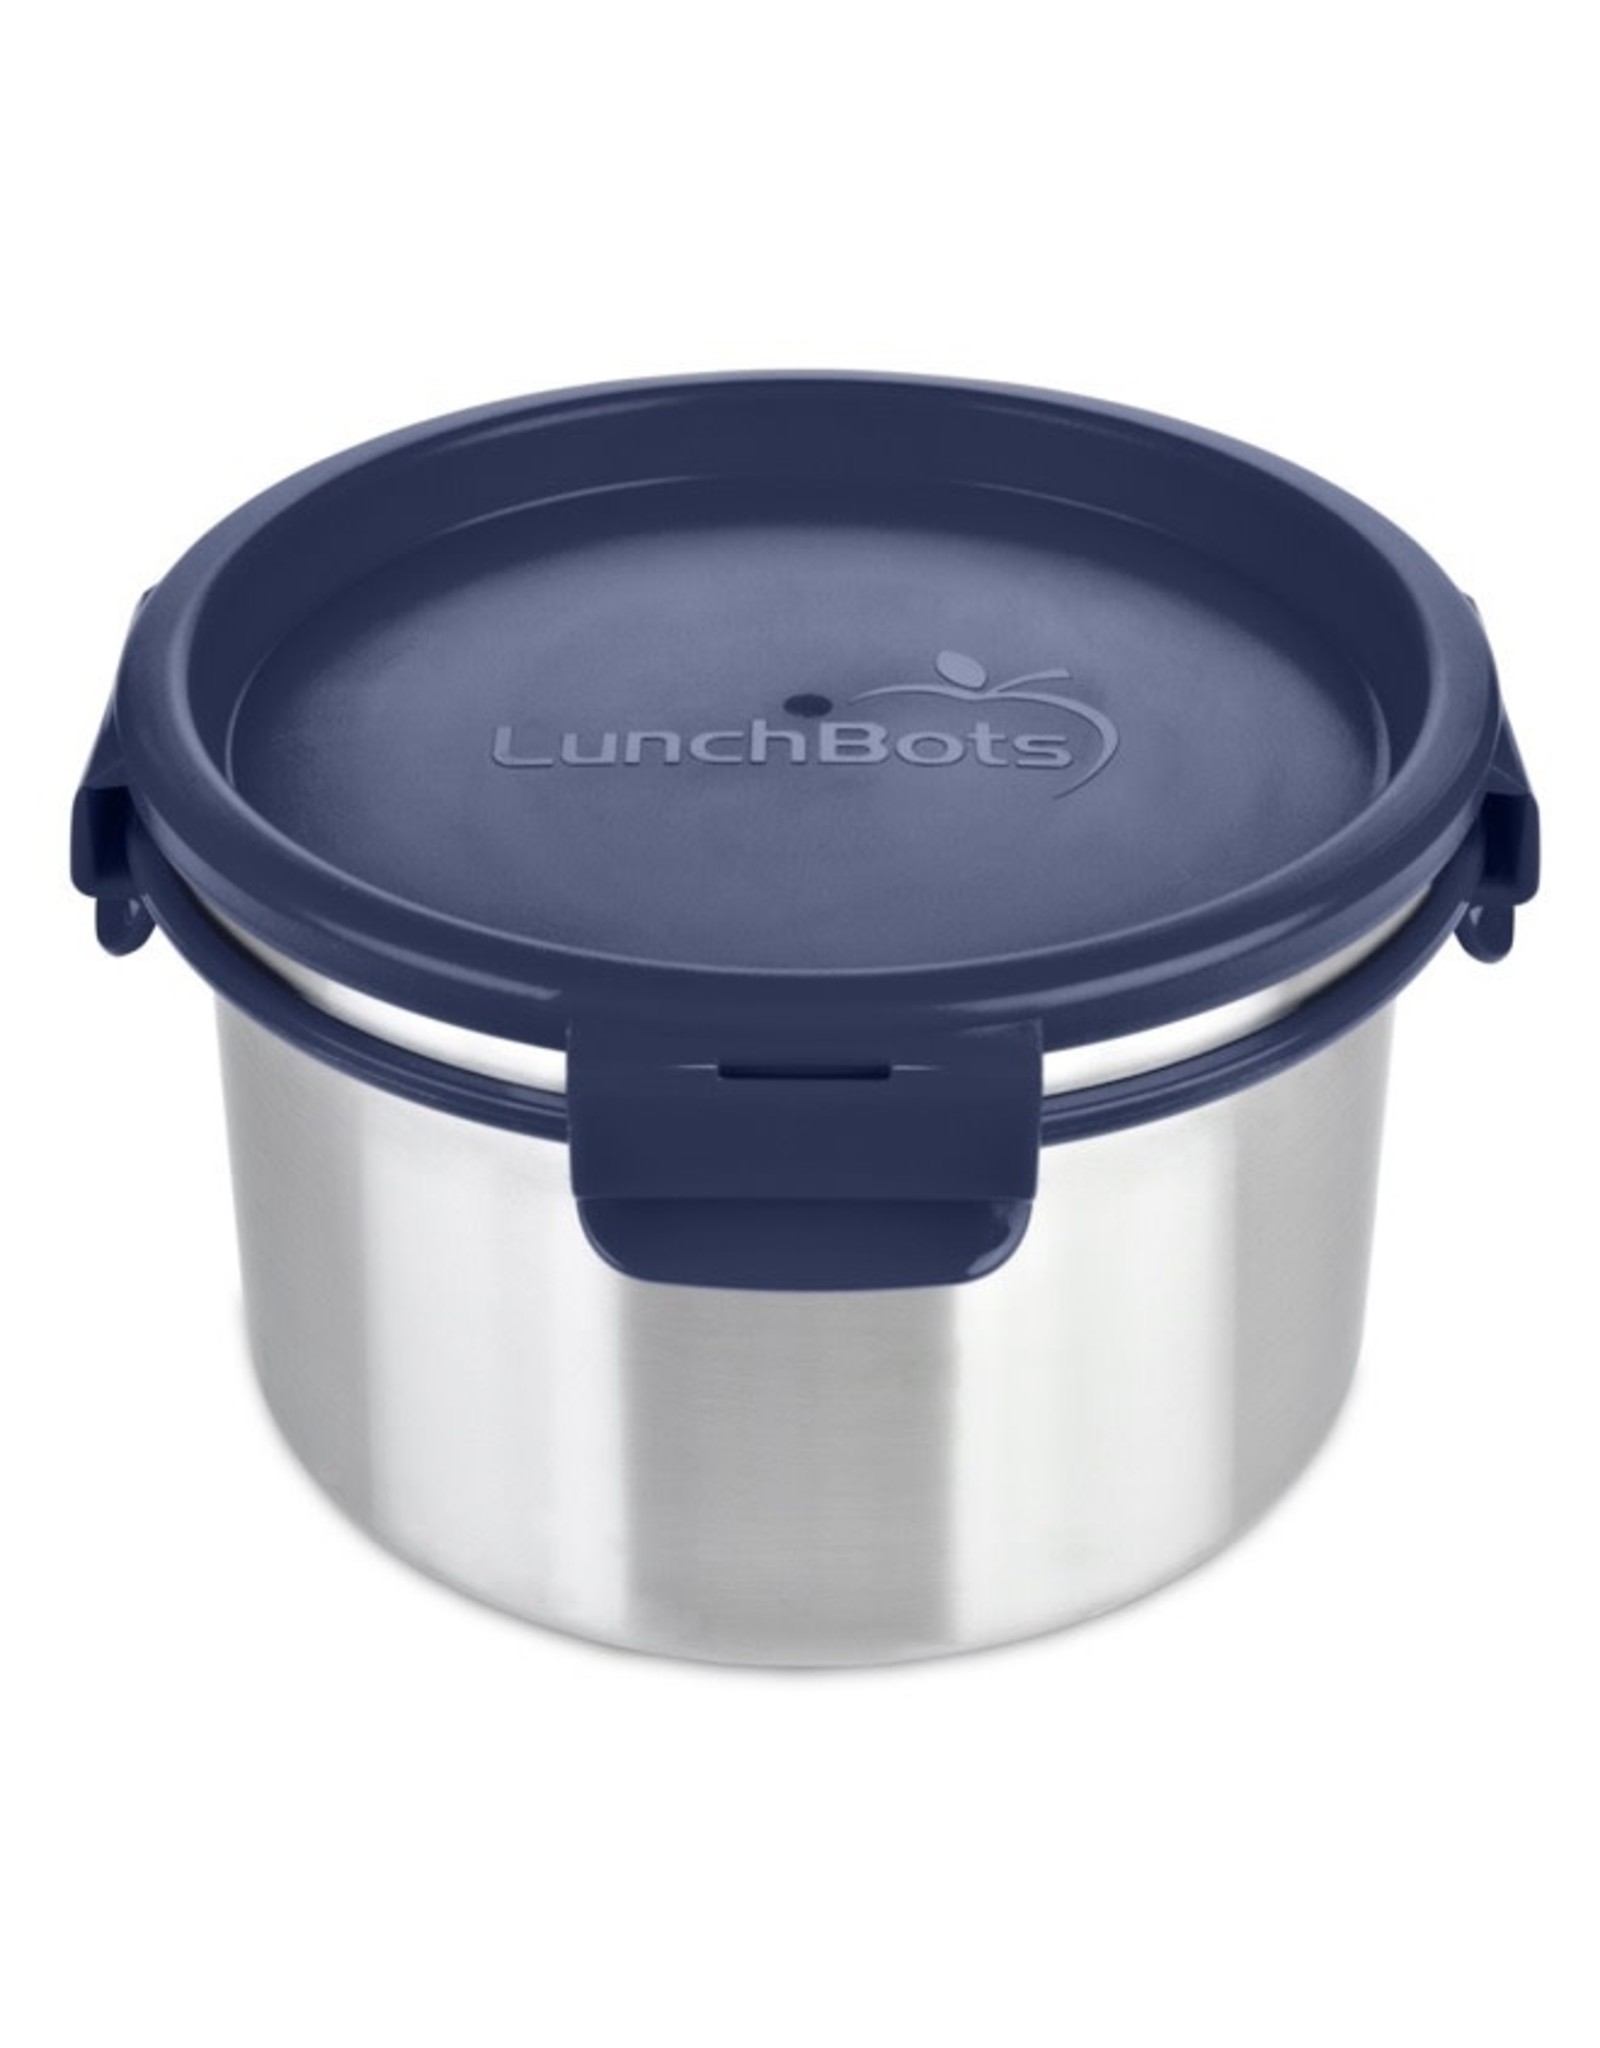 LunchBots LunchBots Salads Bowl 6 cup, Navy